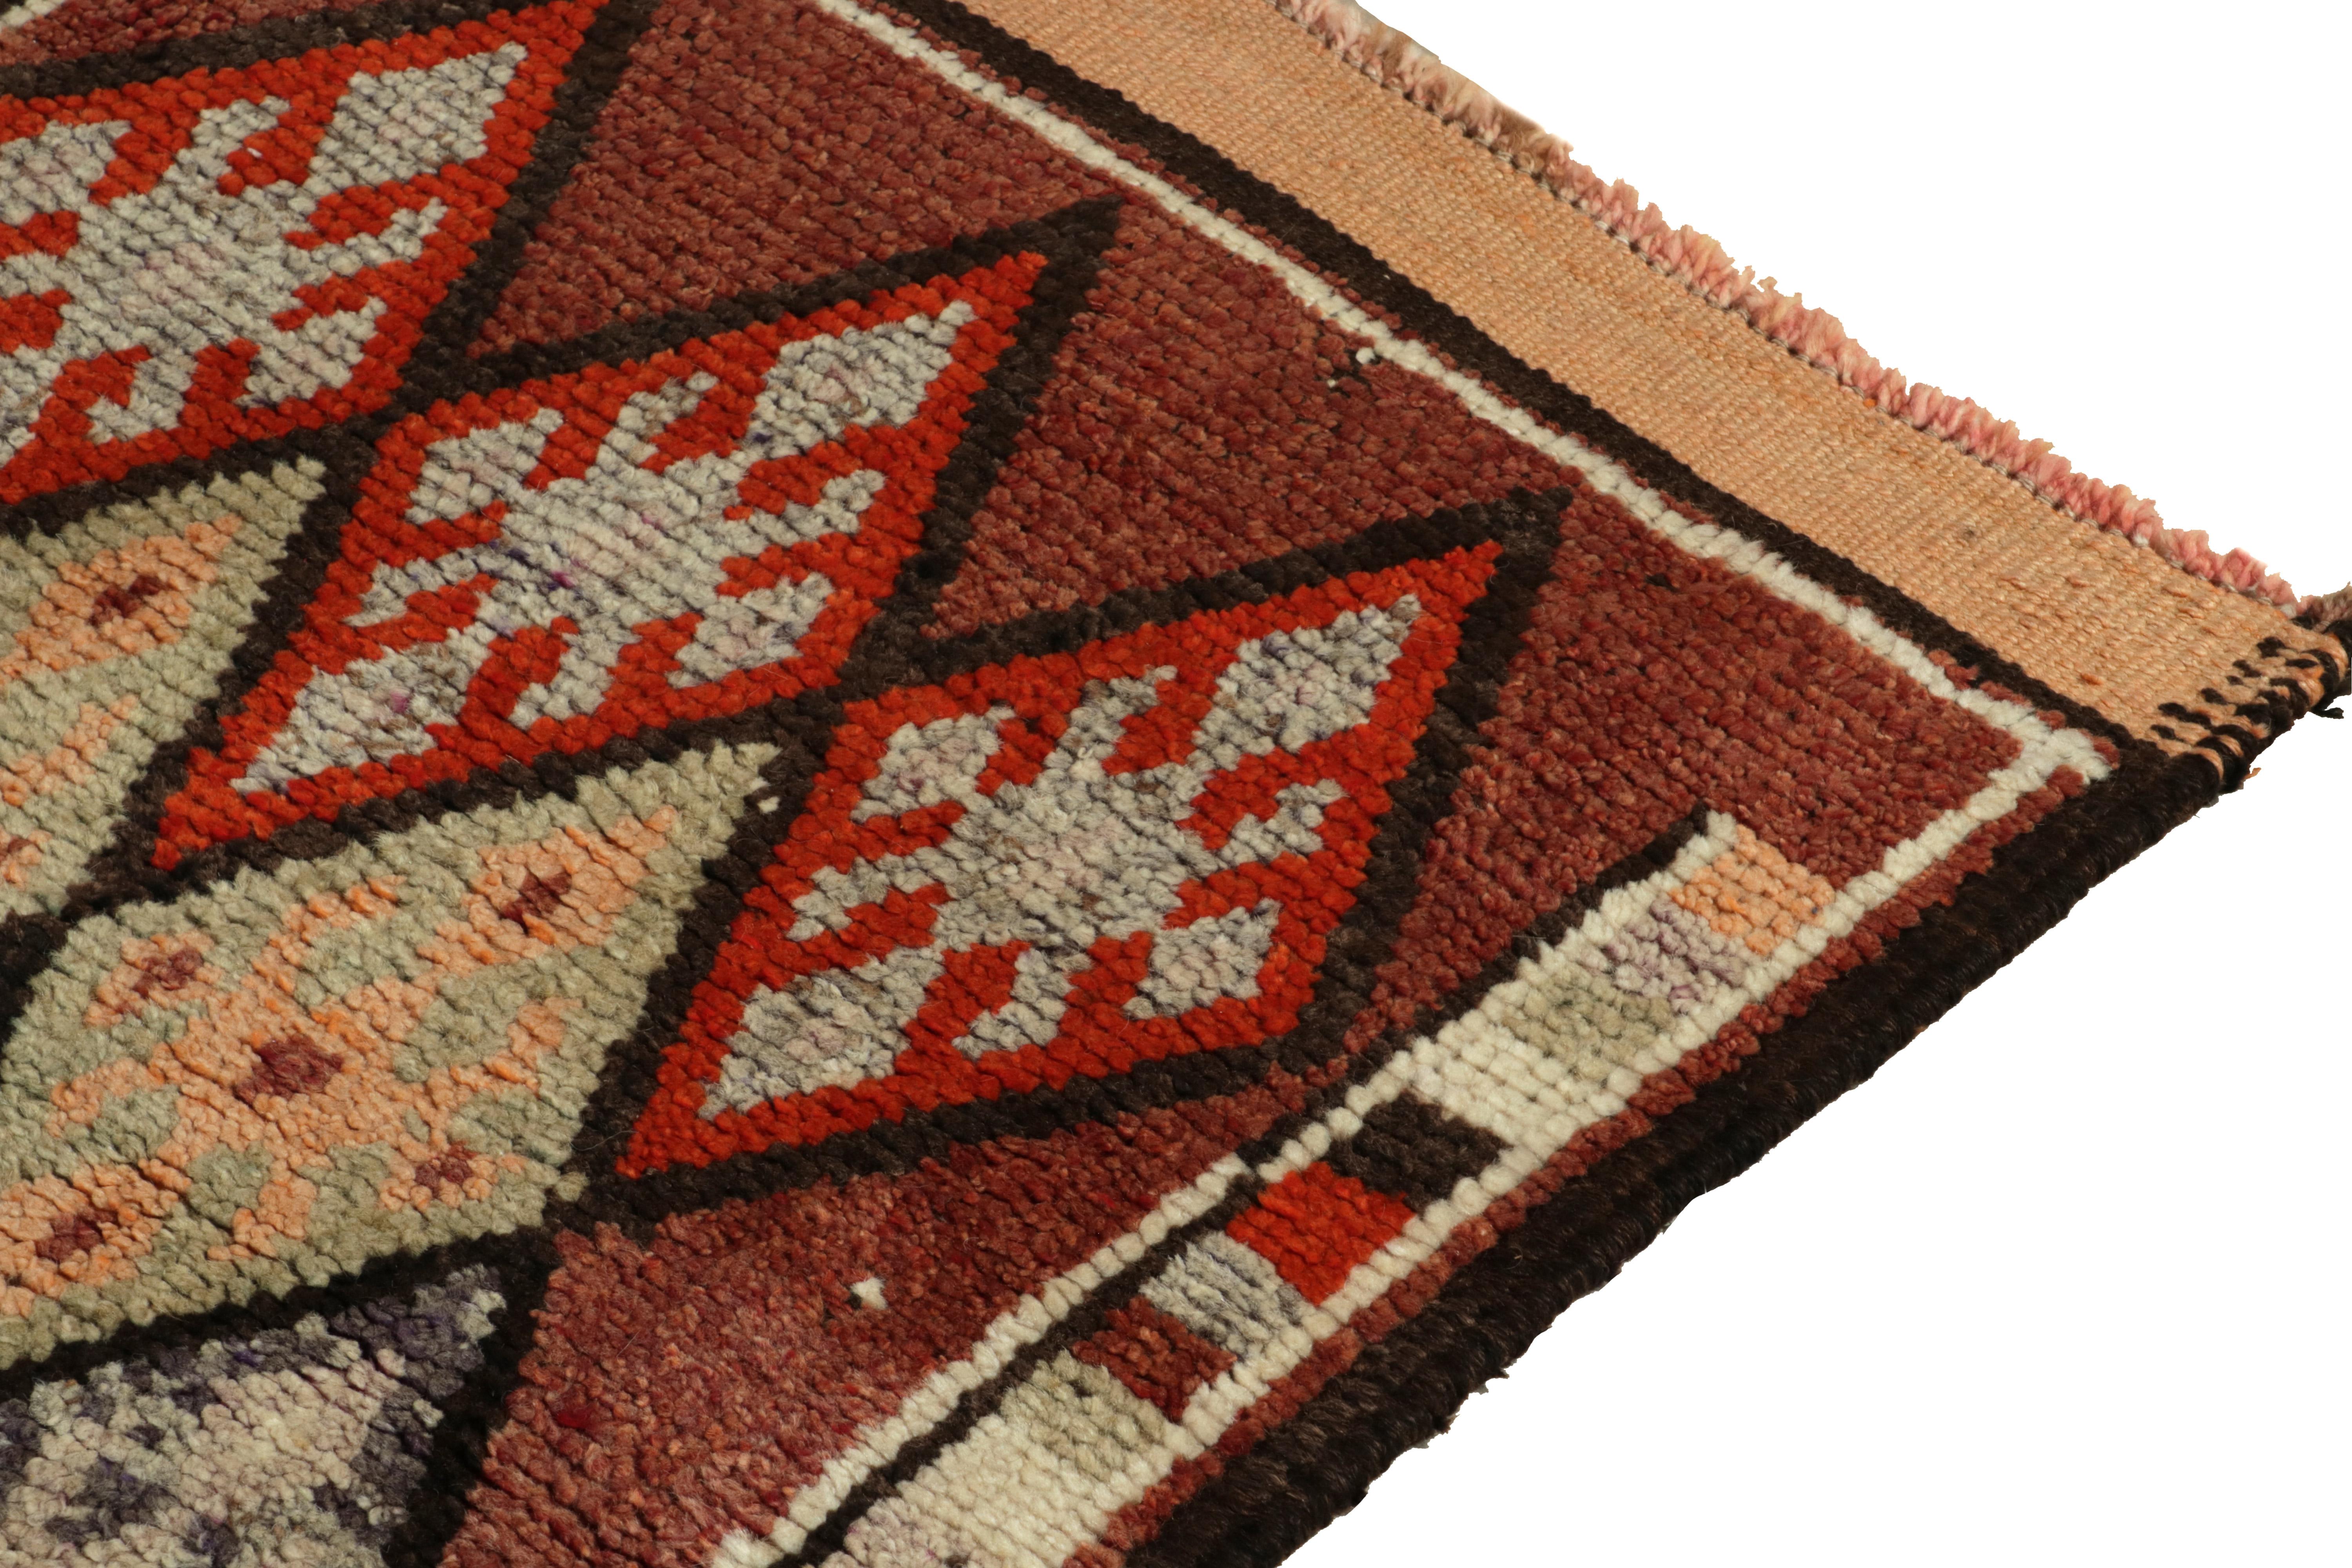 1950s Vintage Tribal Runner in Red, Black, Geometric Patterns by Rug & Kilim In Good Condition For Sale In Long Island City, NY